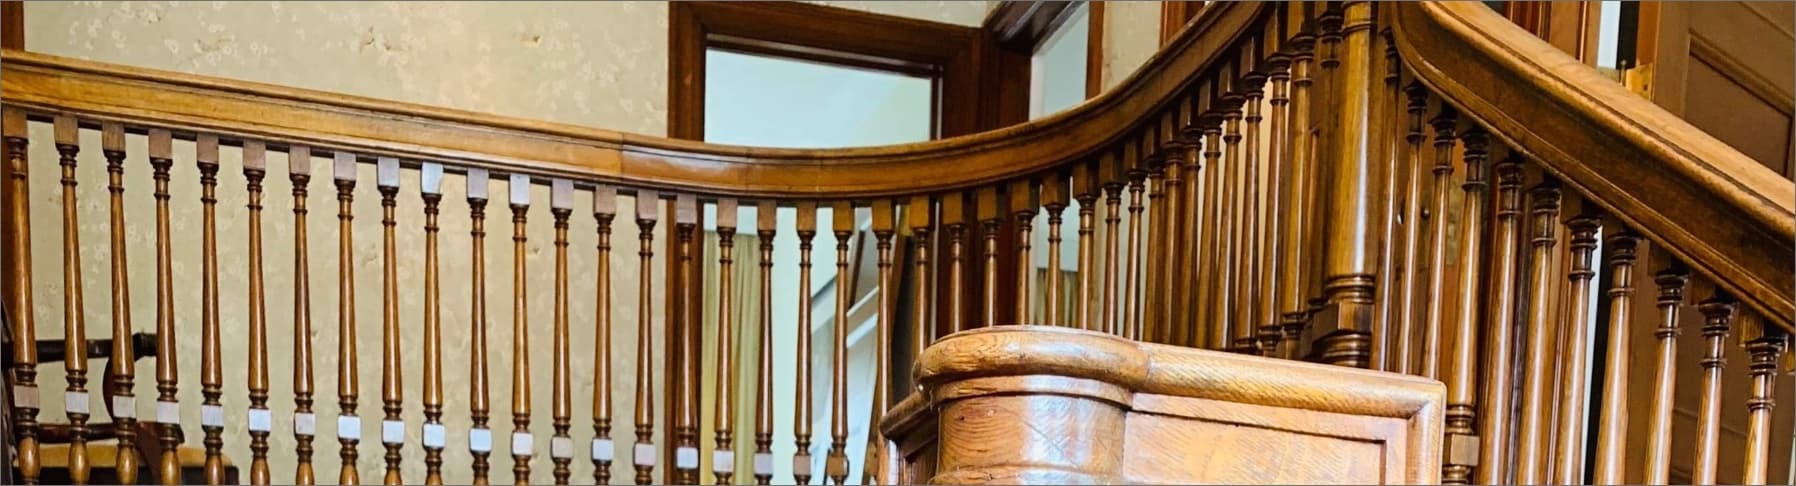 Photo of wooden staircase